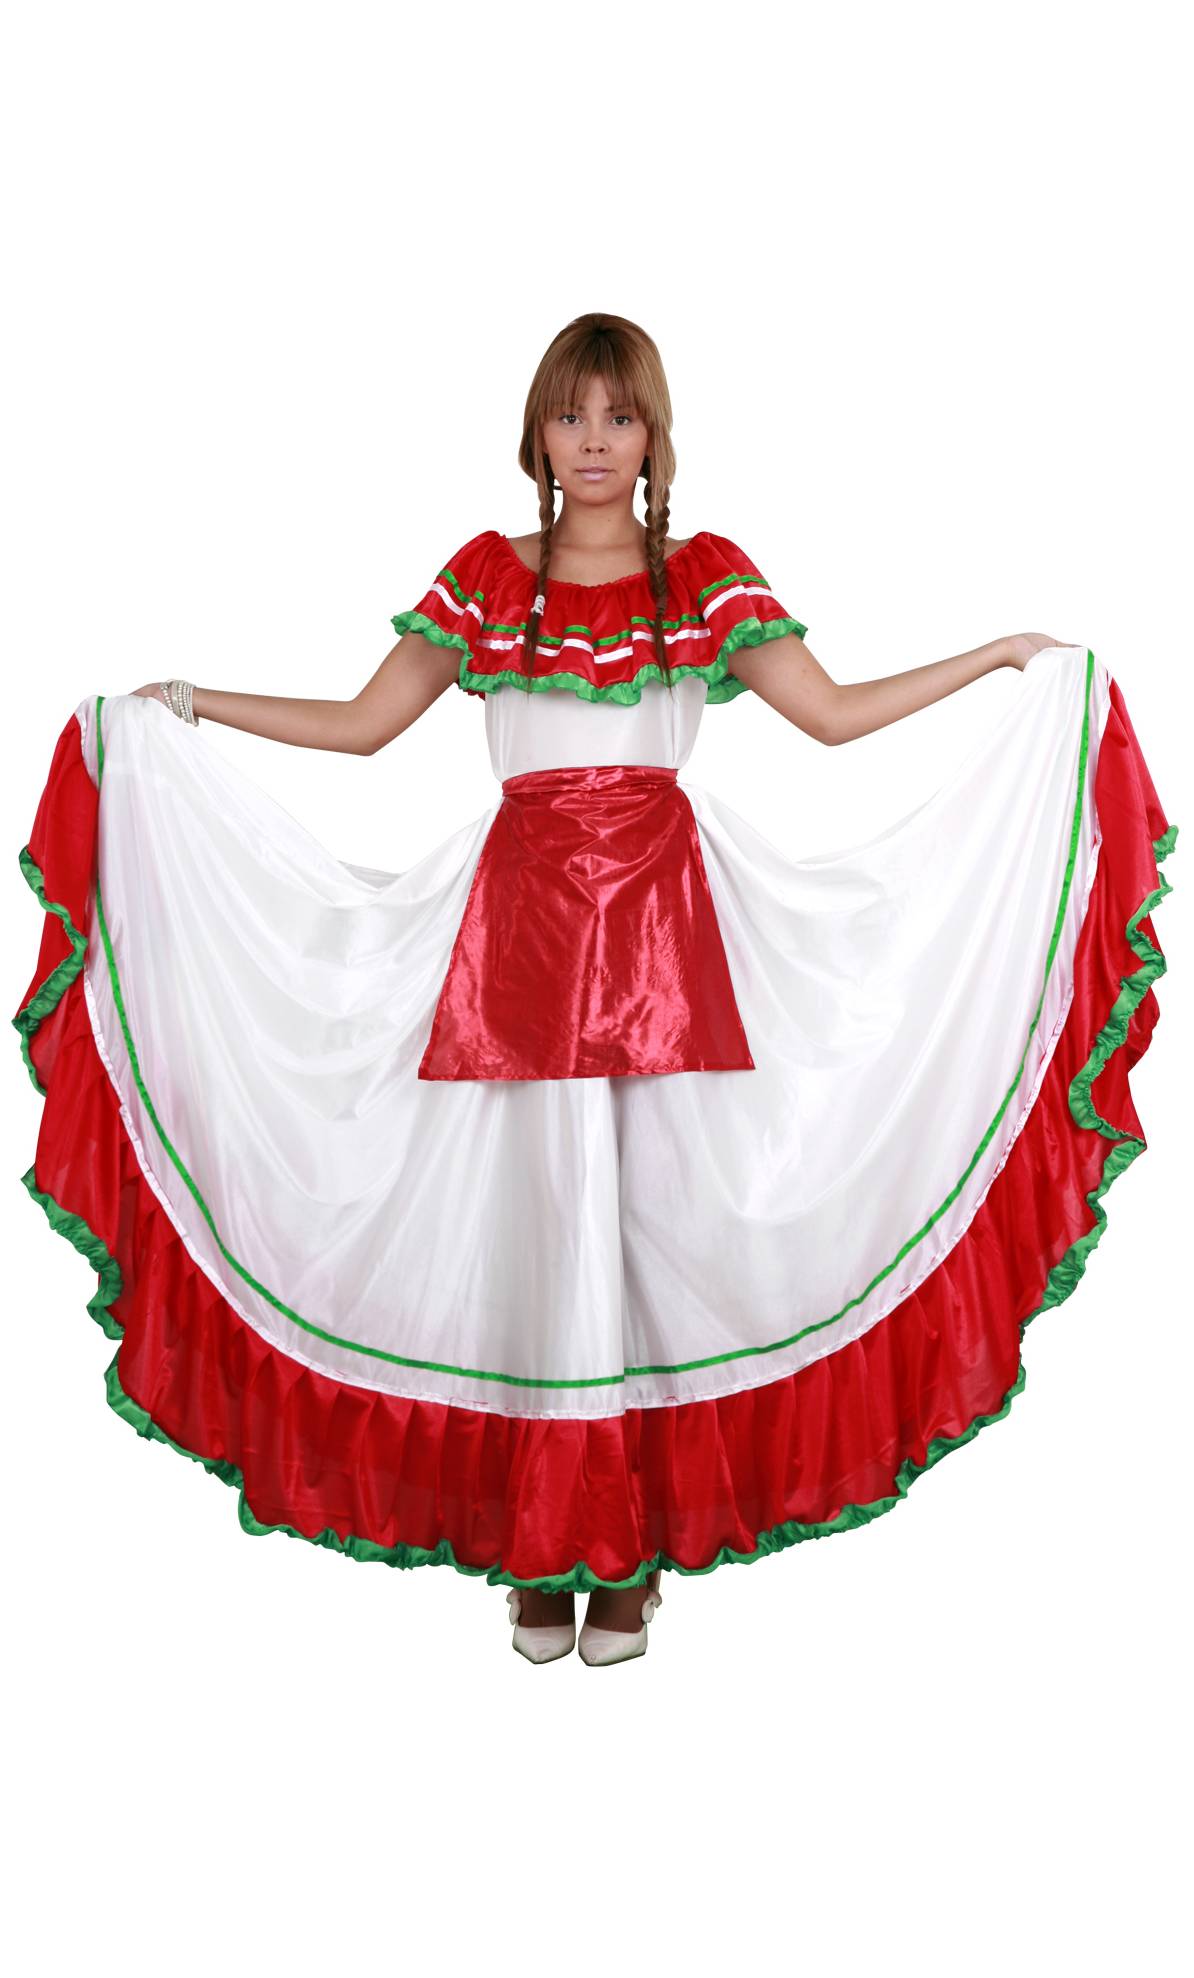 costume mexicaine f2